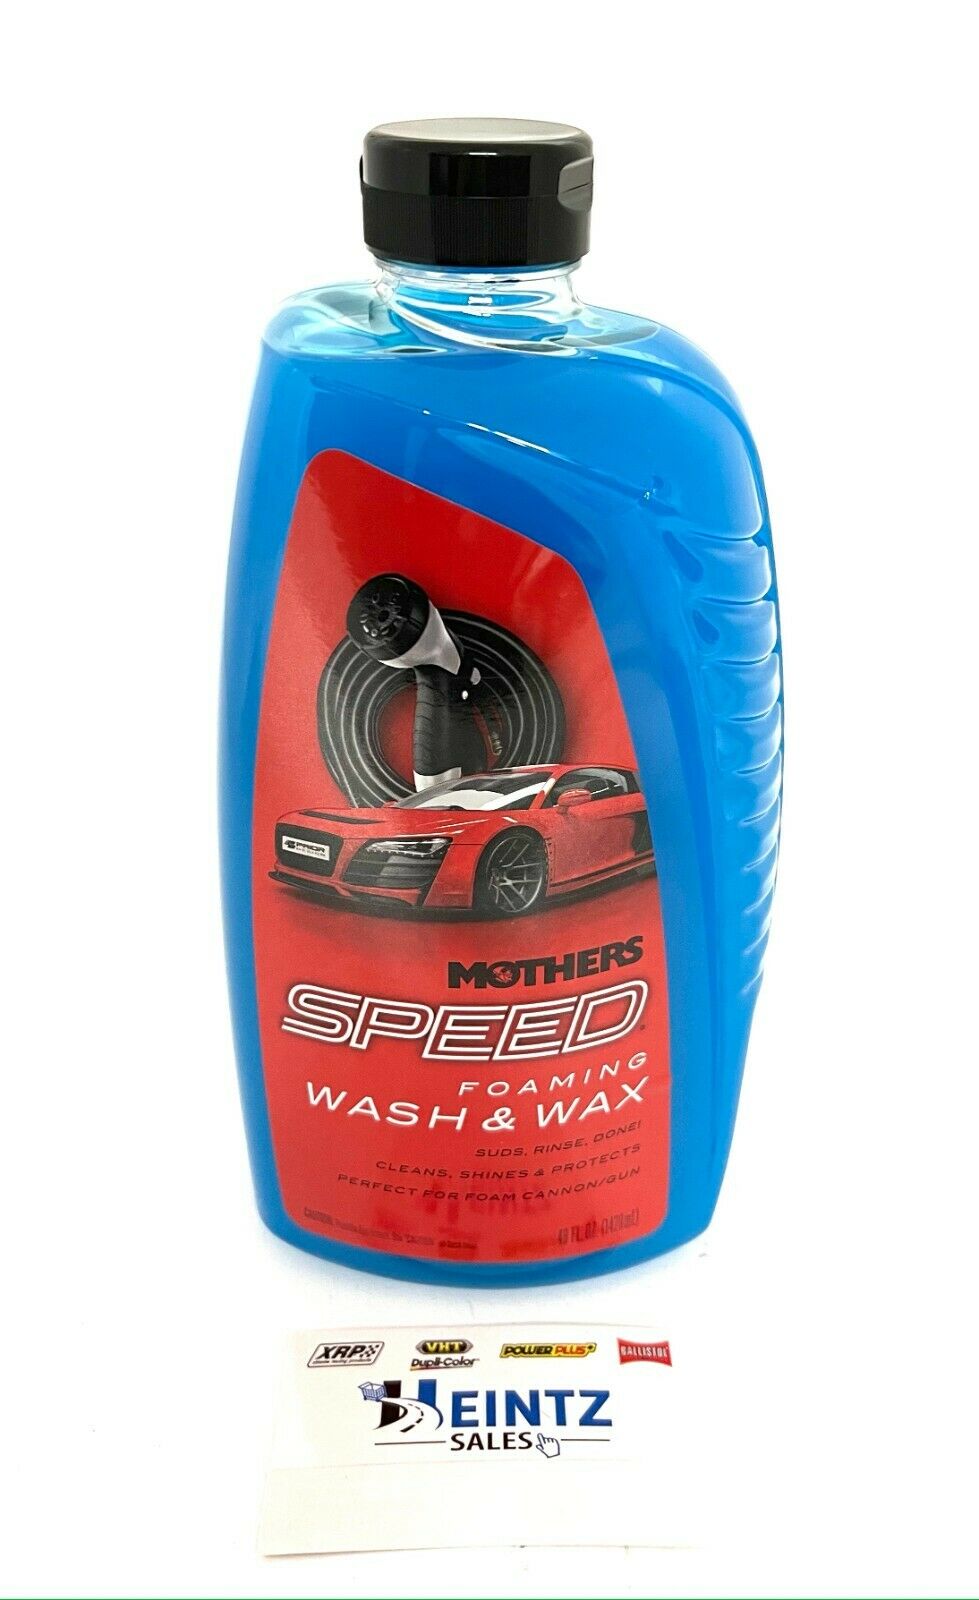 MOTHERS 15648 - Speed Foaming Wash & Wax - Cleans, Shines & Protects - 48 fl. oz.